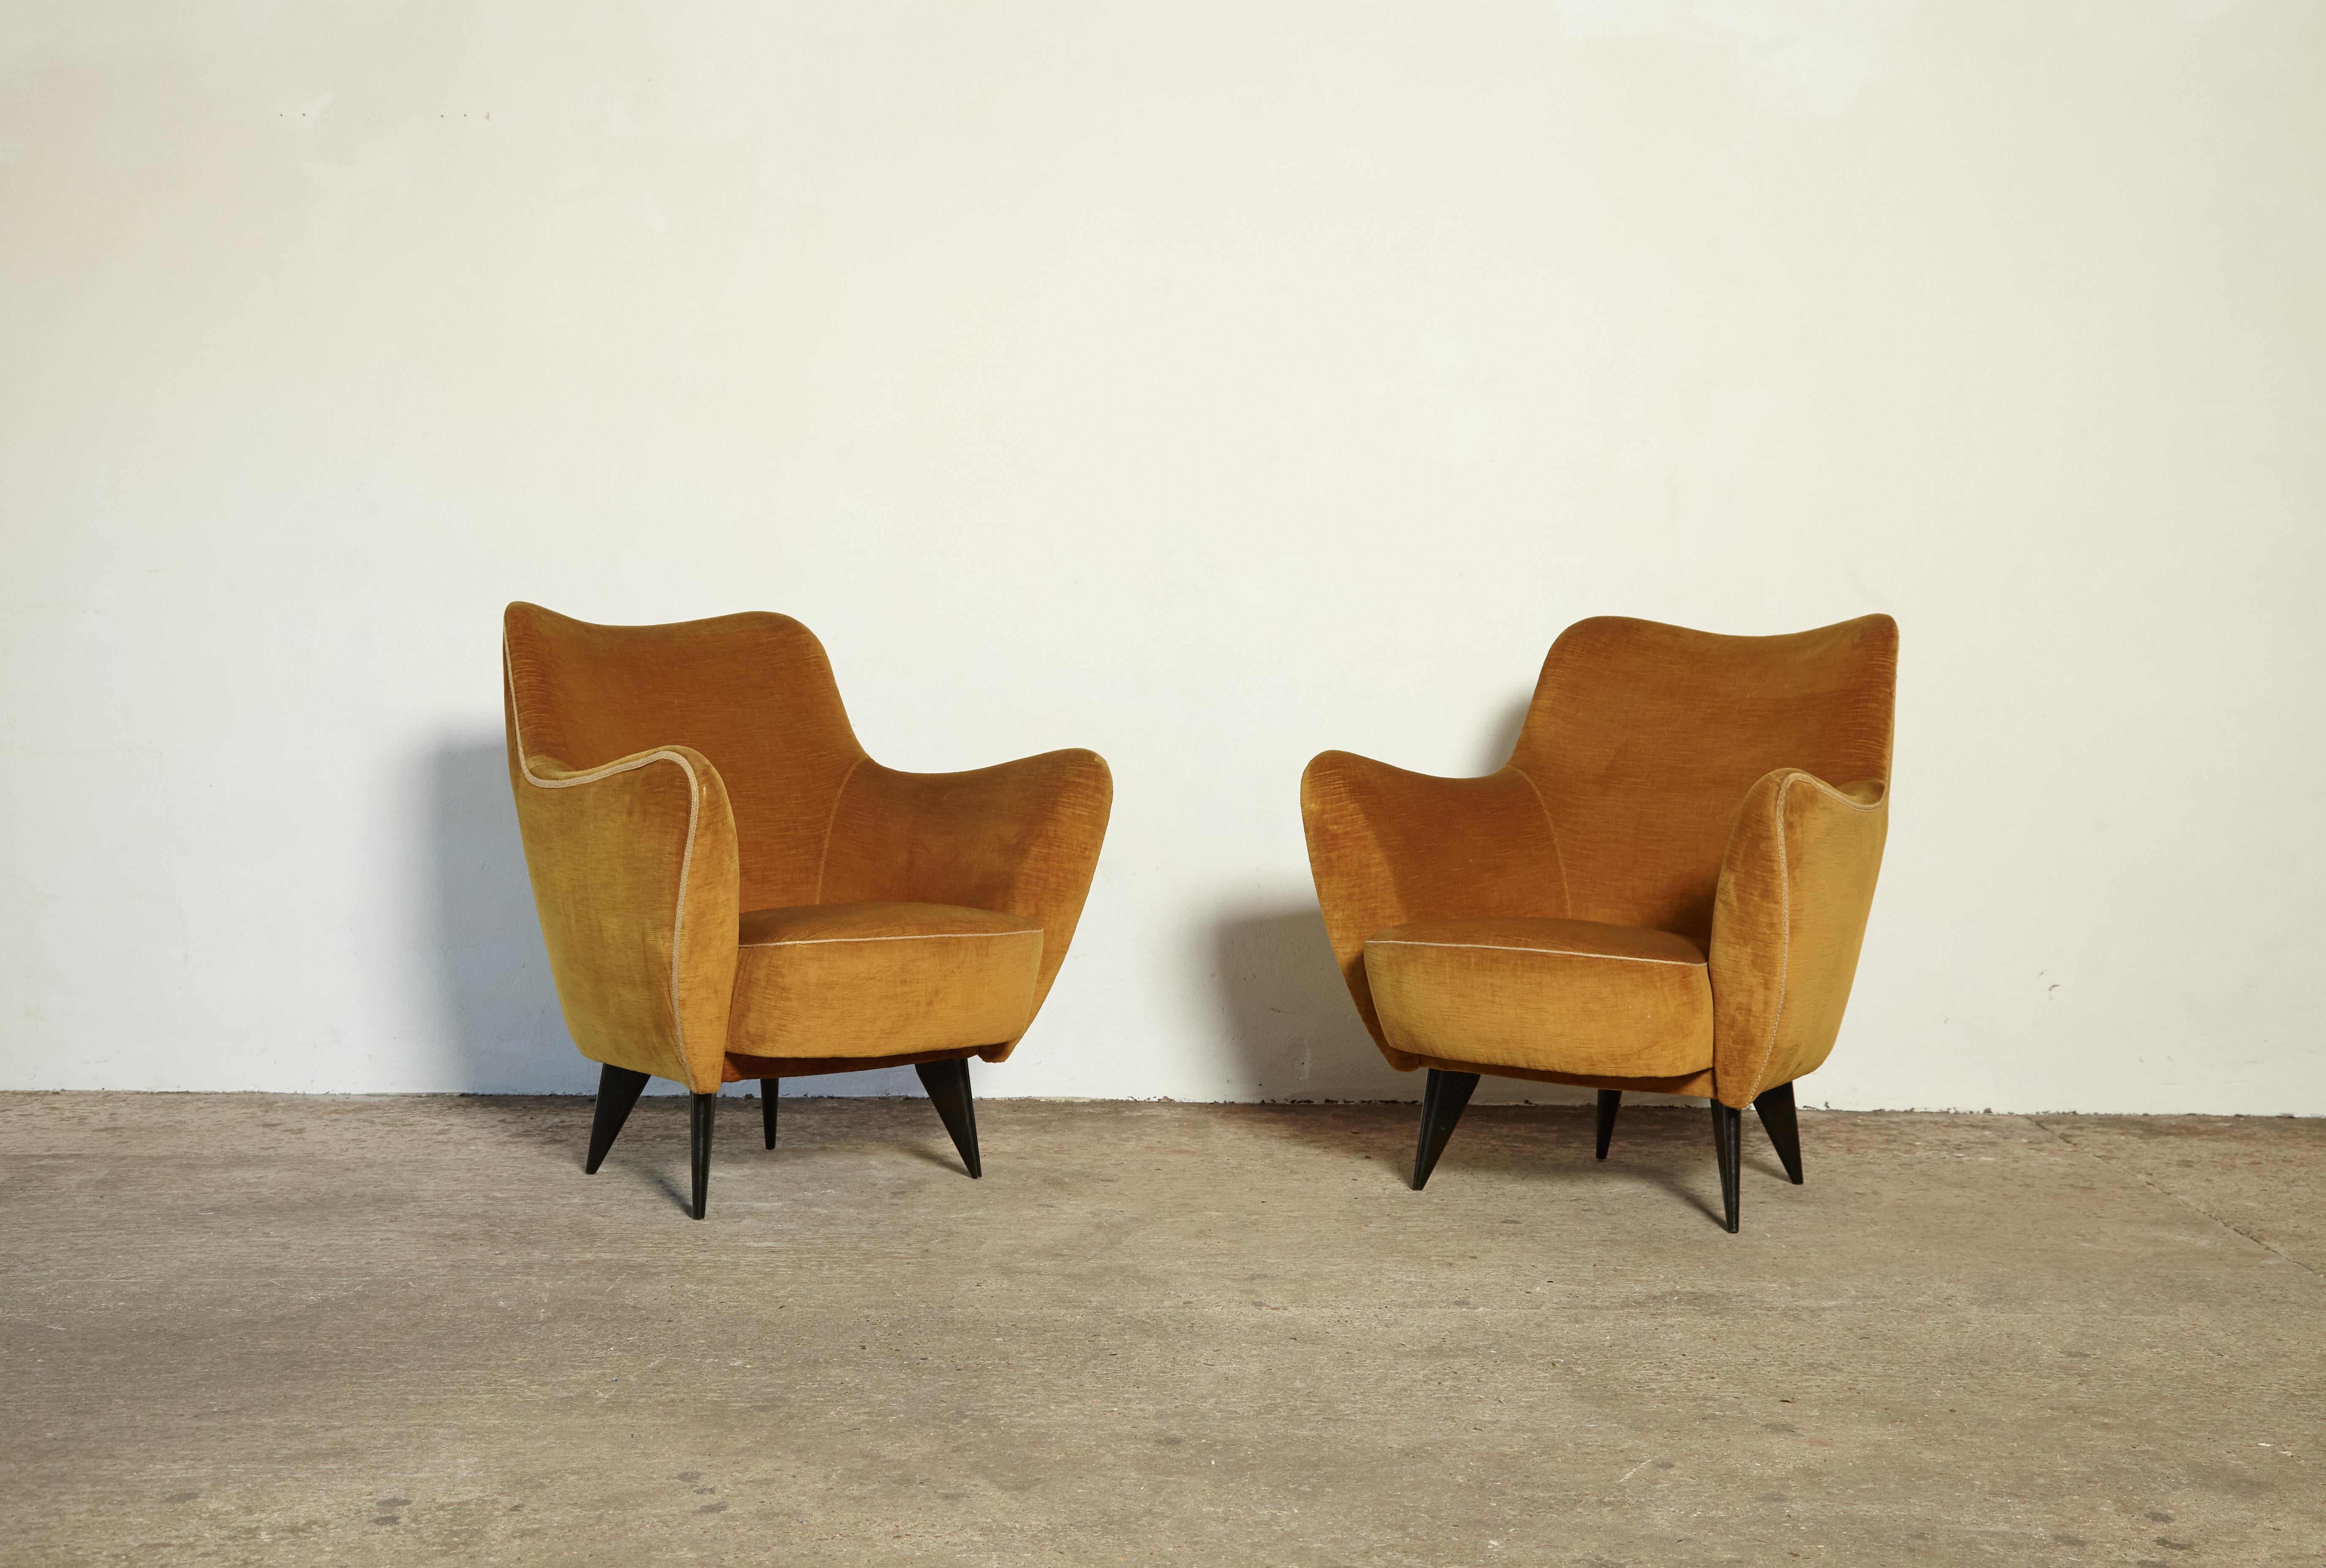 An original pair of Giulia Veronesi Perla Armchairs, I.S.A. Bergamo, Italy, 1950. The yellow/gold velour fabric and piping show some signs of wear. Recovering is possible and we can assist if required.   A pair of matching chairs is available -